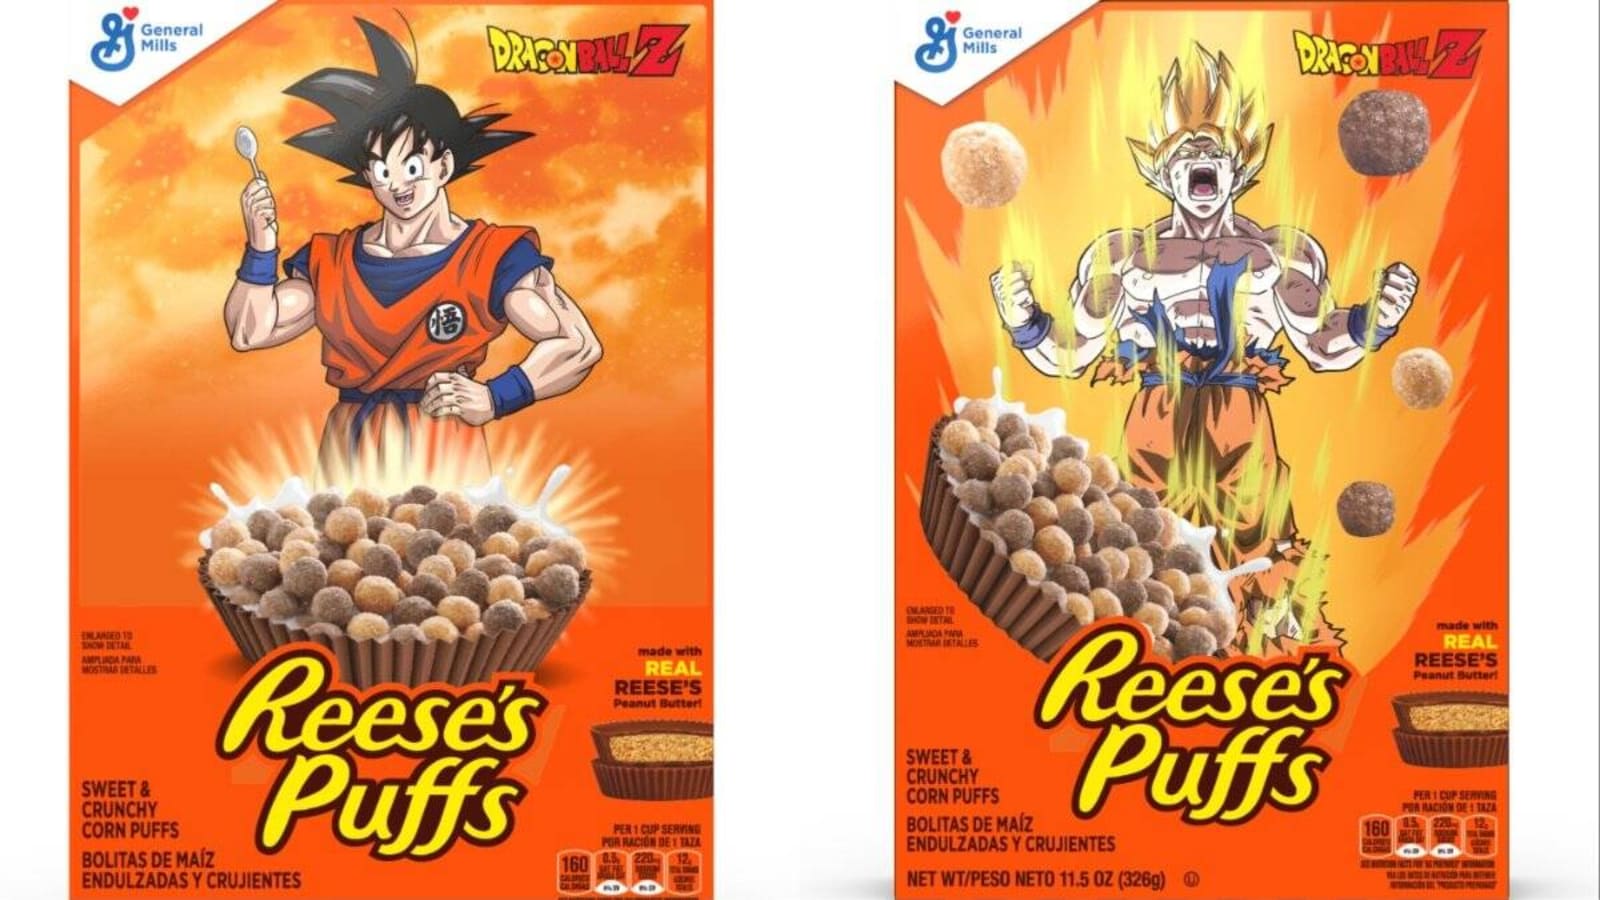 DRAGON BALL Z and Reese’s Puffs Release Limited-Edition Super Saiyan Goku Cereal Box